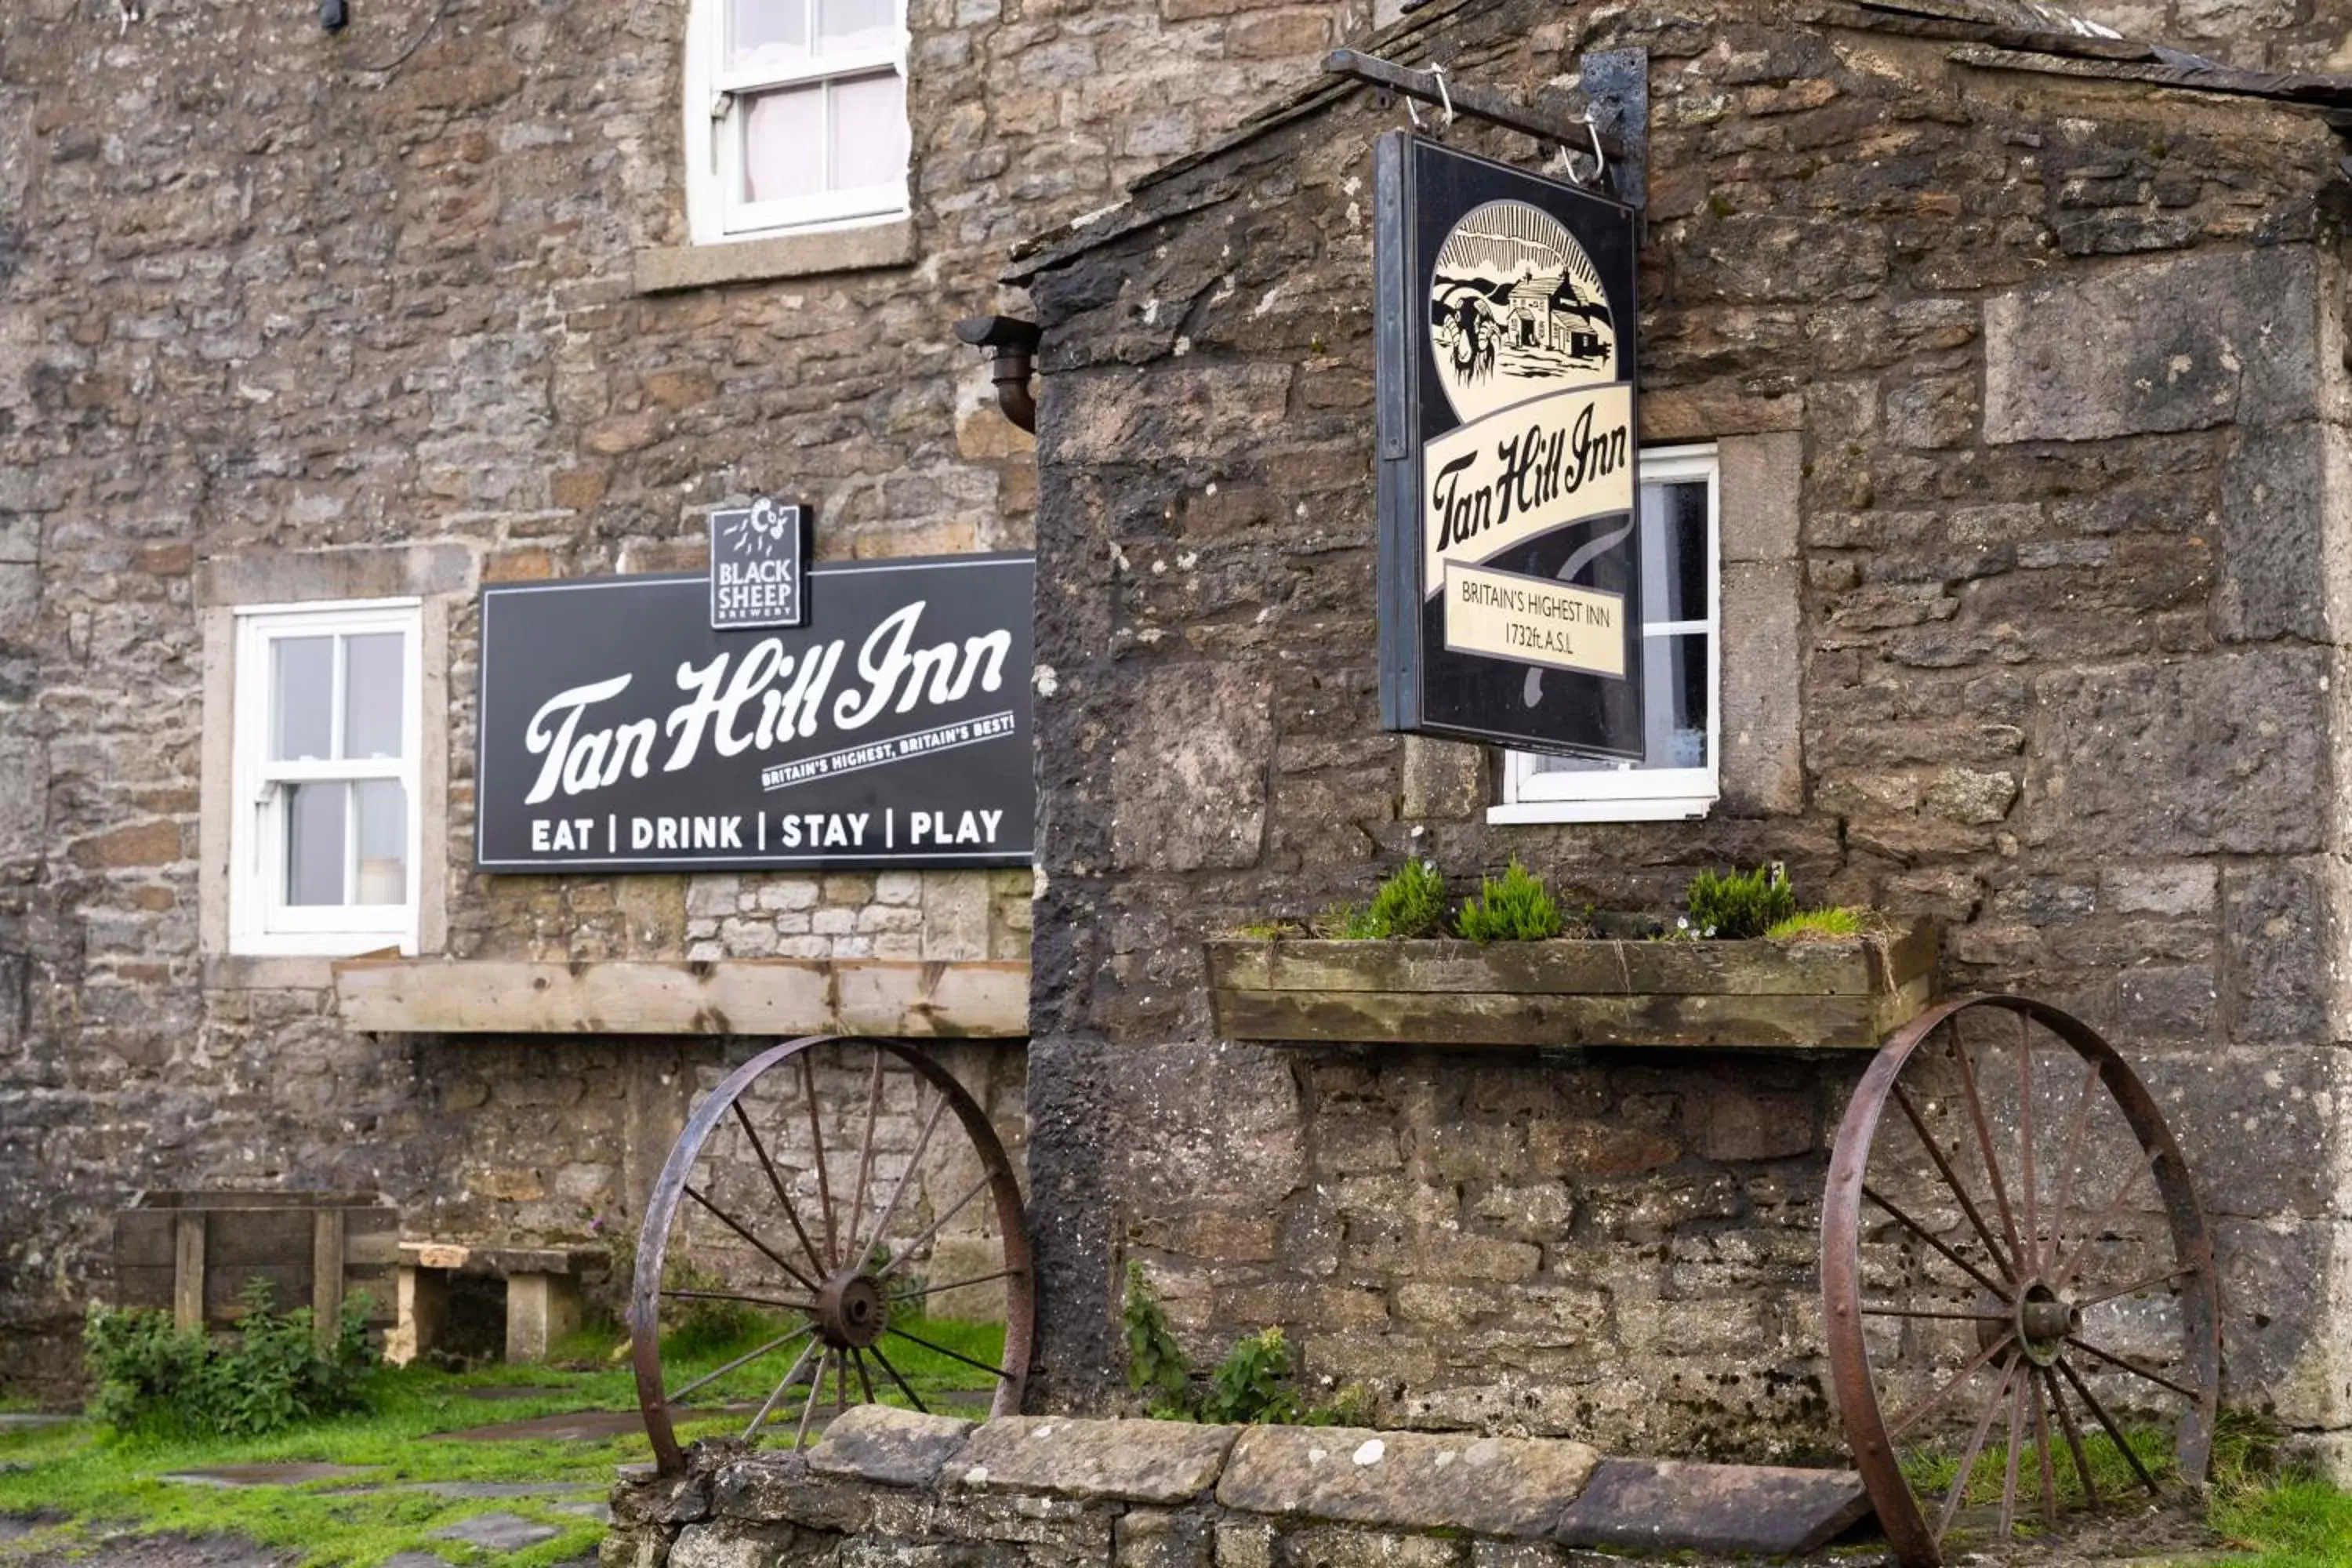 Property building in The Tan Hill Inn